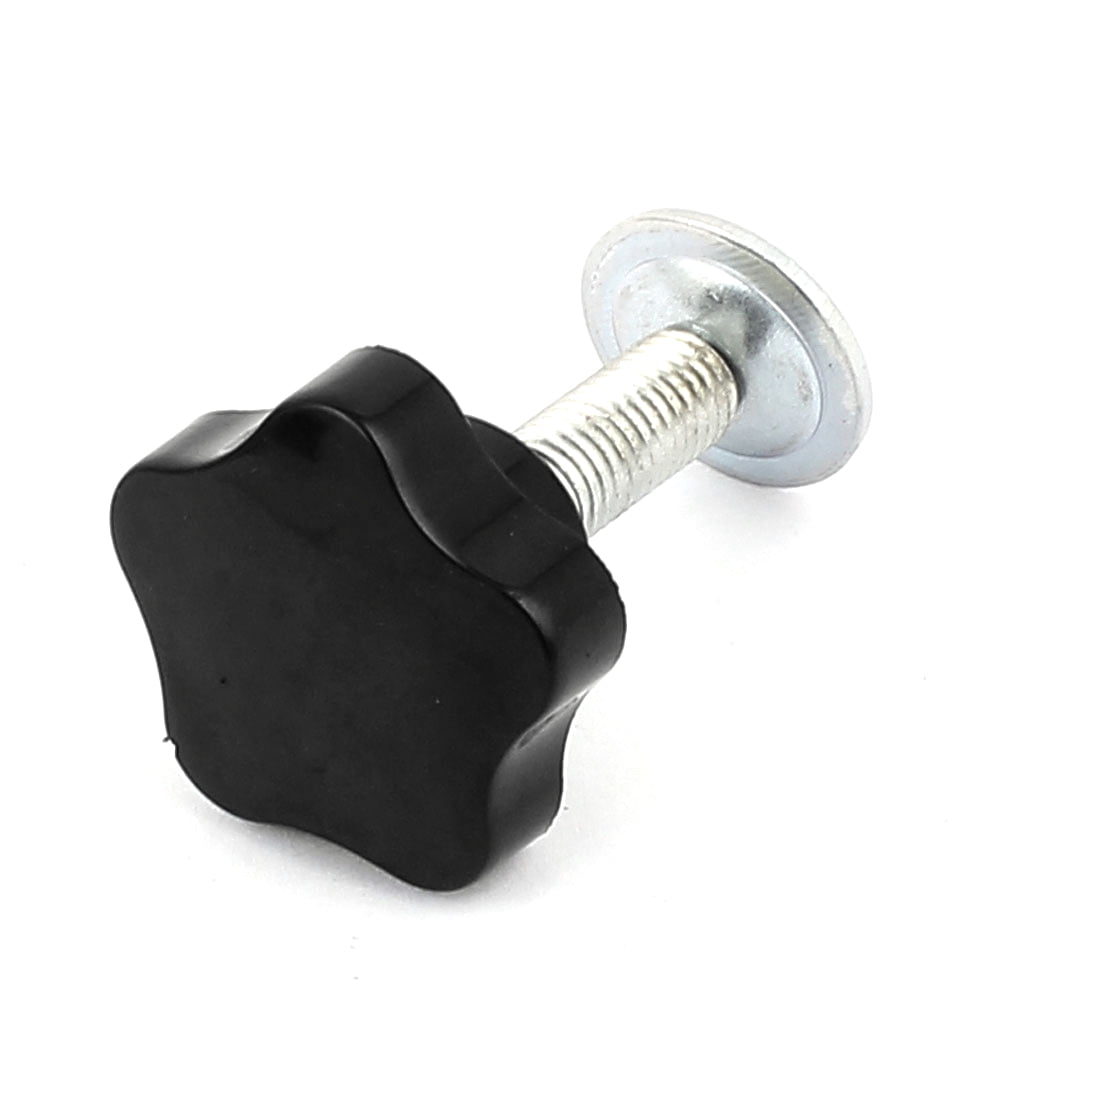 Aexit M6x10mm Male Chain & Rope Fittings Threaded Plastic Star Head Clamping Knob Grip Wire Rope Clips Black 2pcs